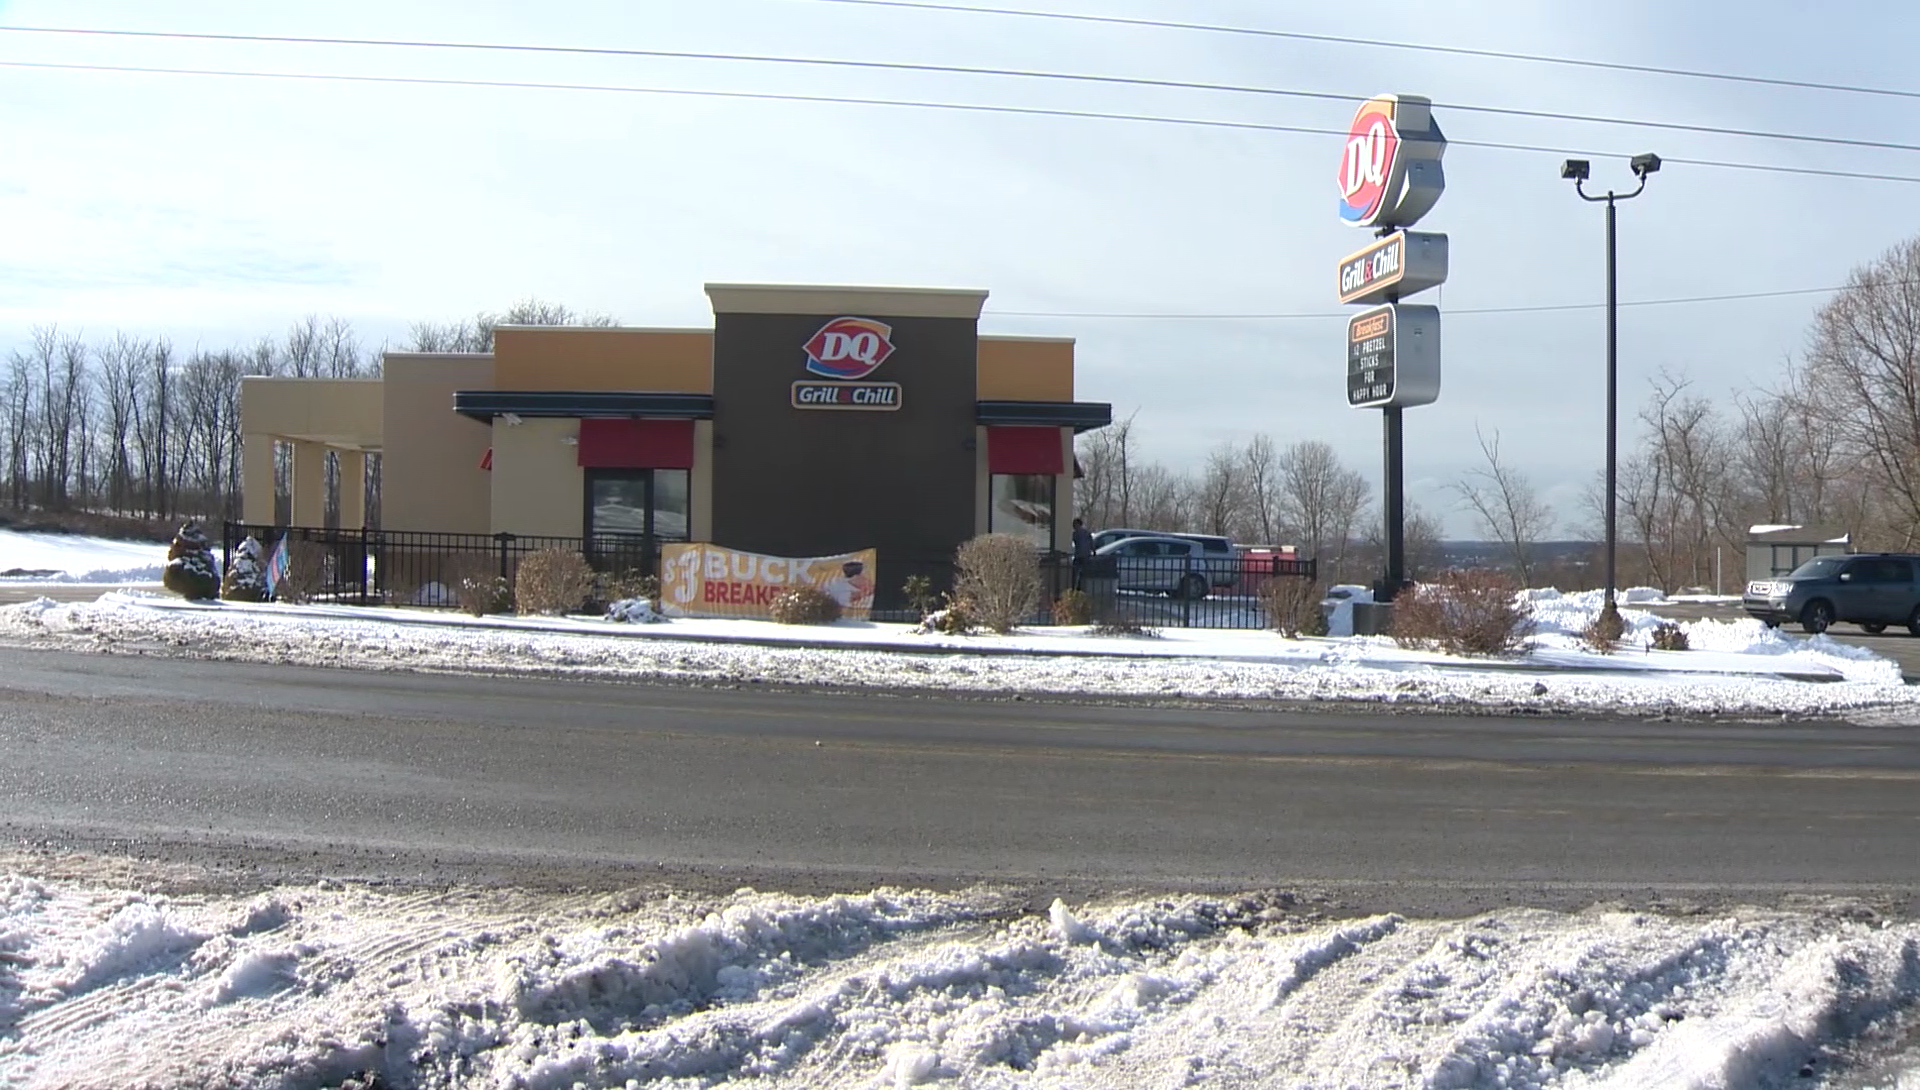 Man threatens to kill officers, attacks them with cane inside Dairy Queen Restaurant